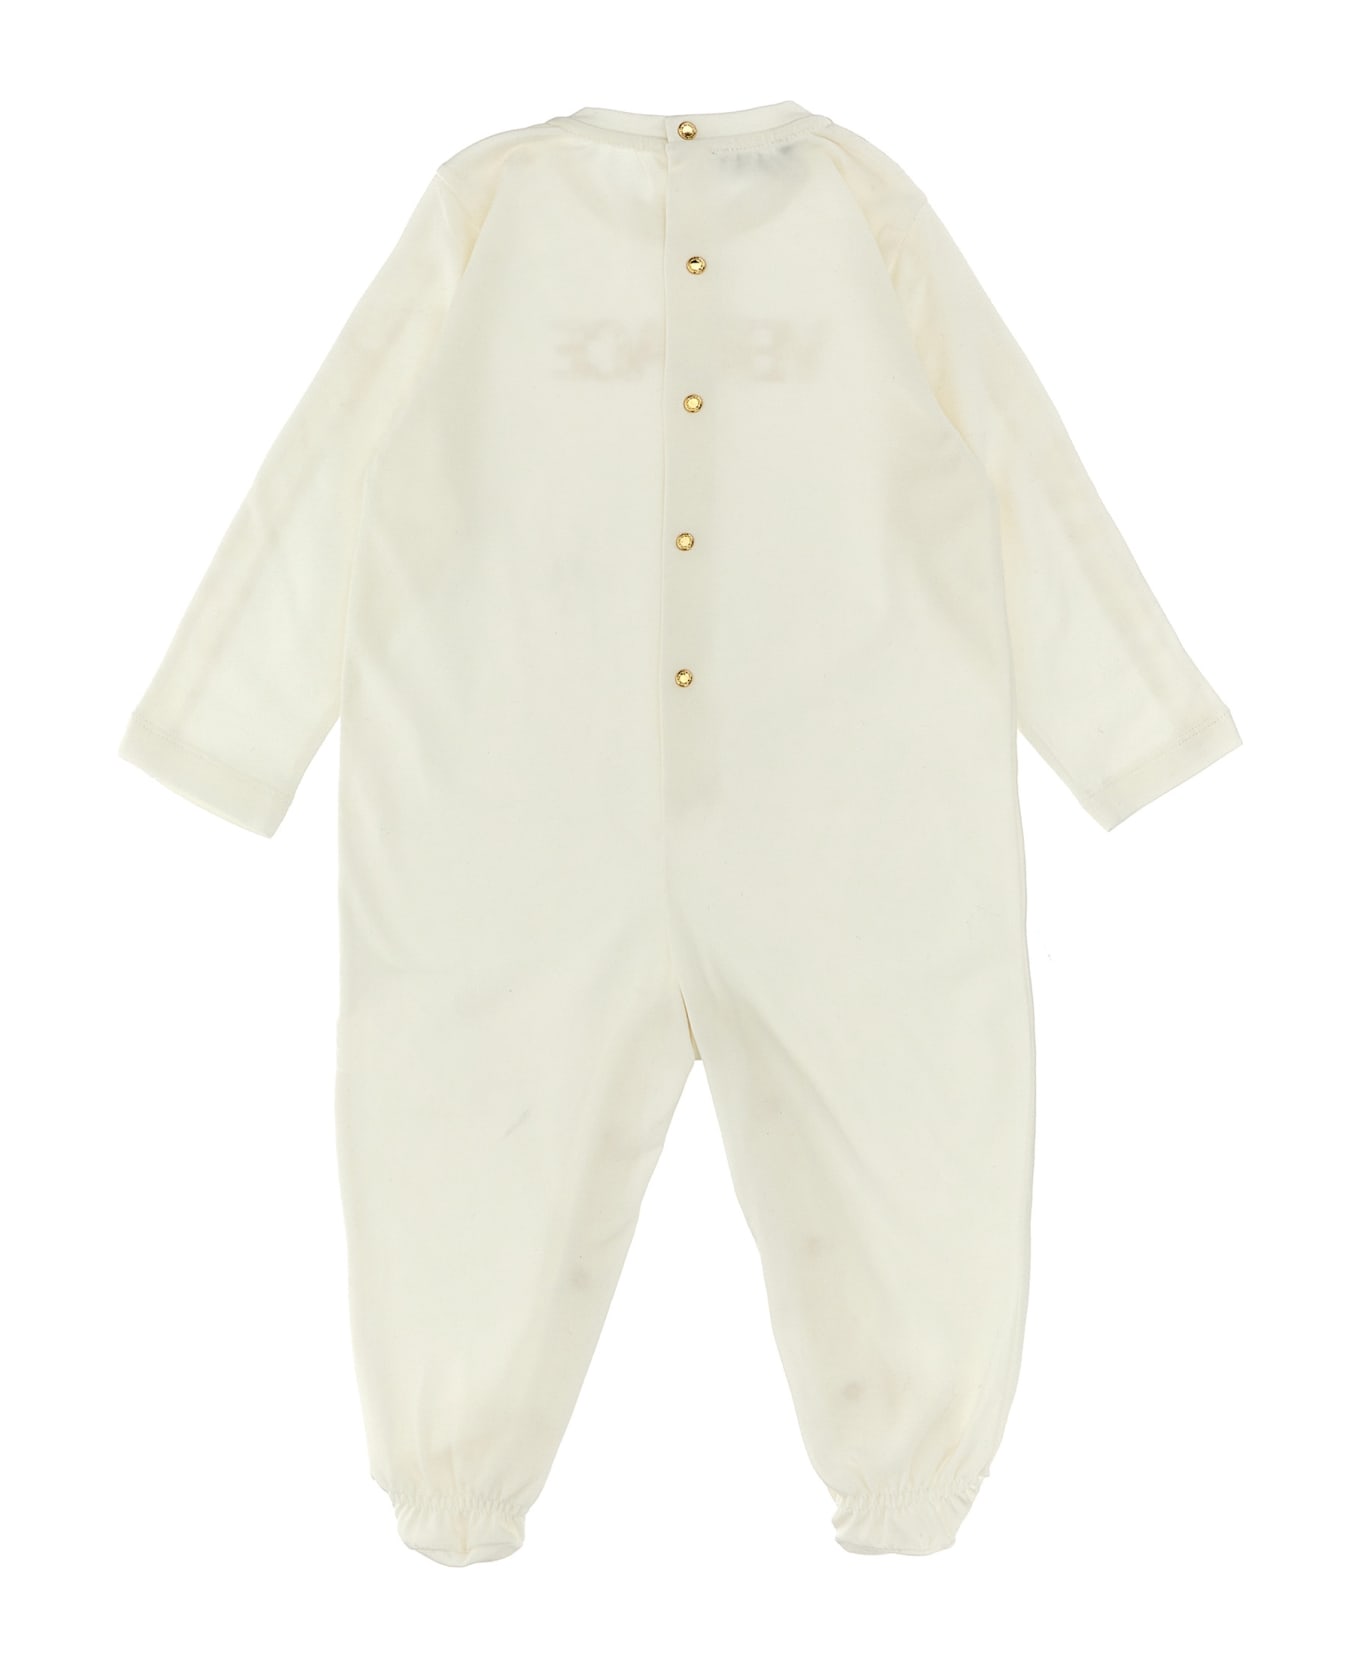 Versace 'barocco' Sleepsuit And Beanie Baby Set - White